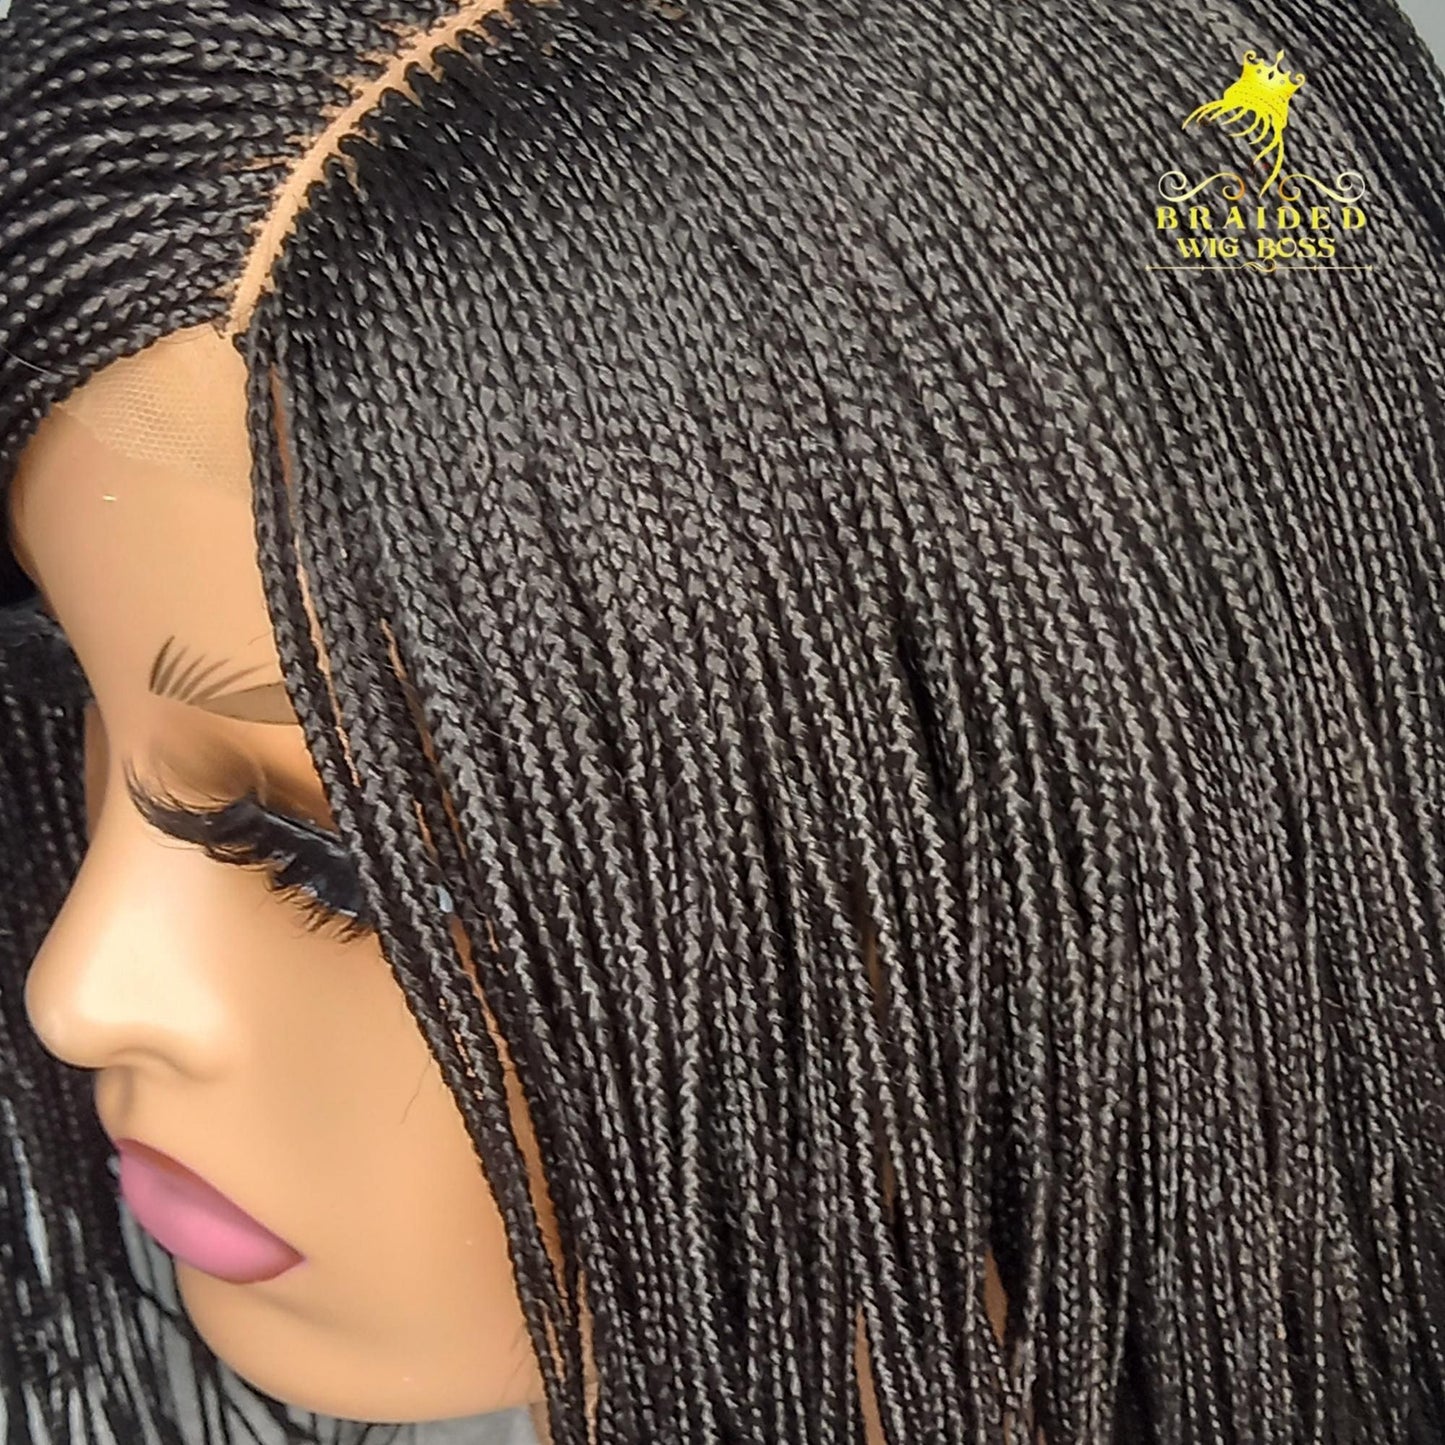 10 Inches Short Micro Braid Wig on 2 By 4 Lace Front Color 2 Without Baby Hairs Glueless Braided Lace Wig for Black Women - BRAIDED WIG BOSS